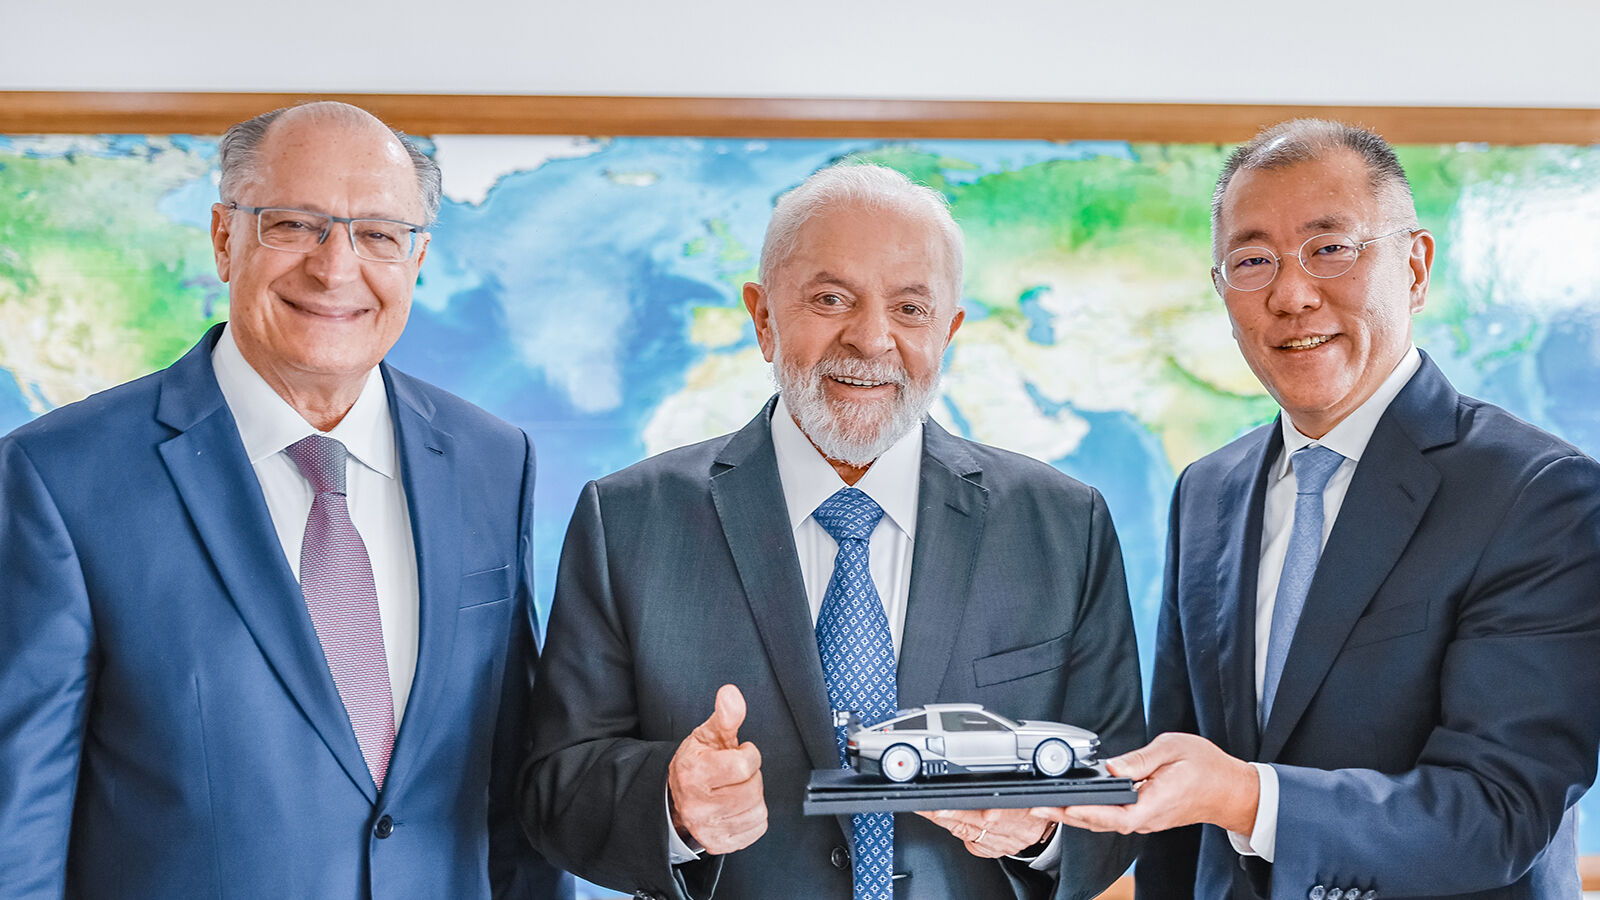 Hyundai Motor Group Expands Opportunities in Brazil, Focusing on Progress-Driven Mobility, Eco-Friendly Innovation